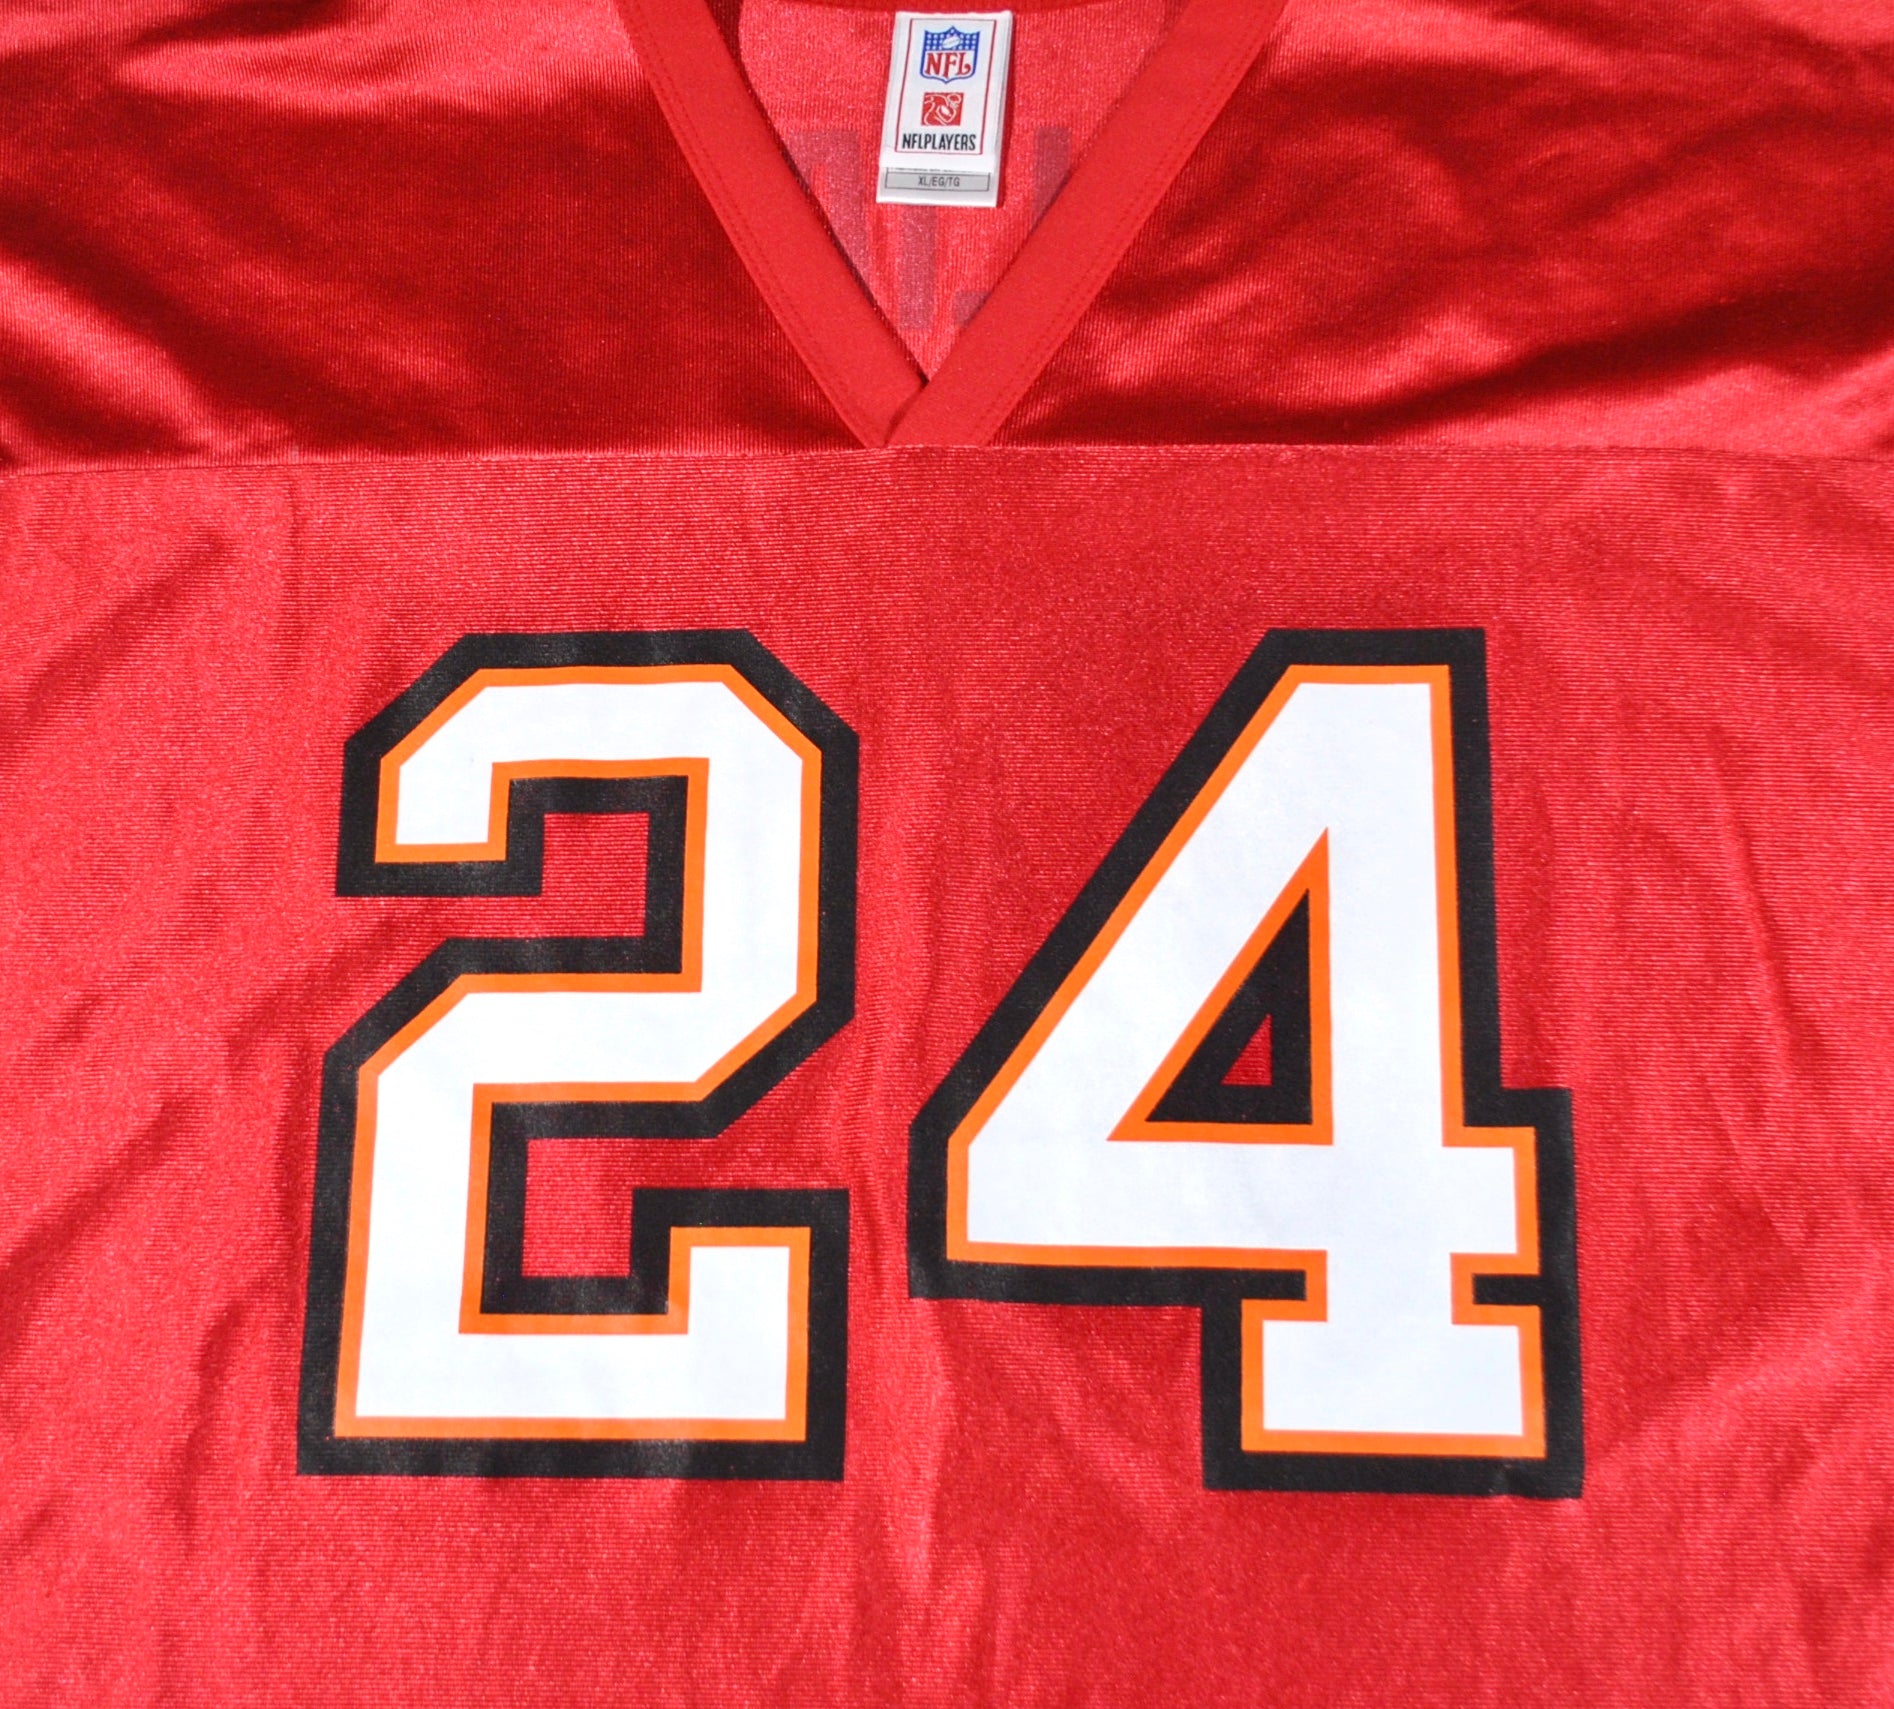 Cadillac Williams Tampa Bay Buccaneers Jersey